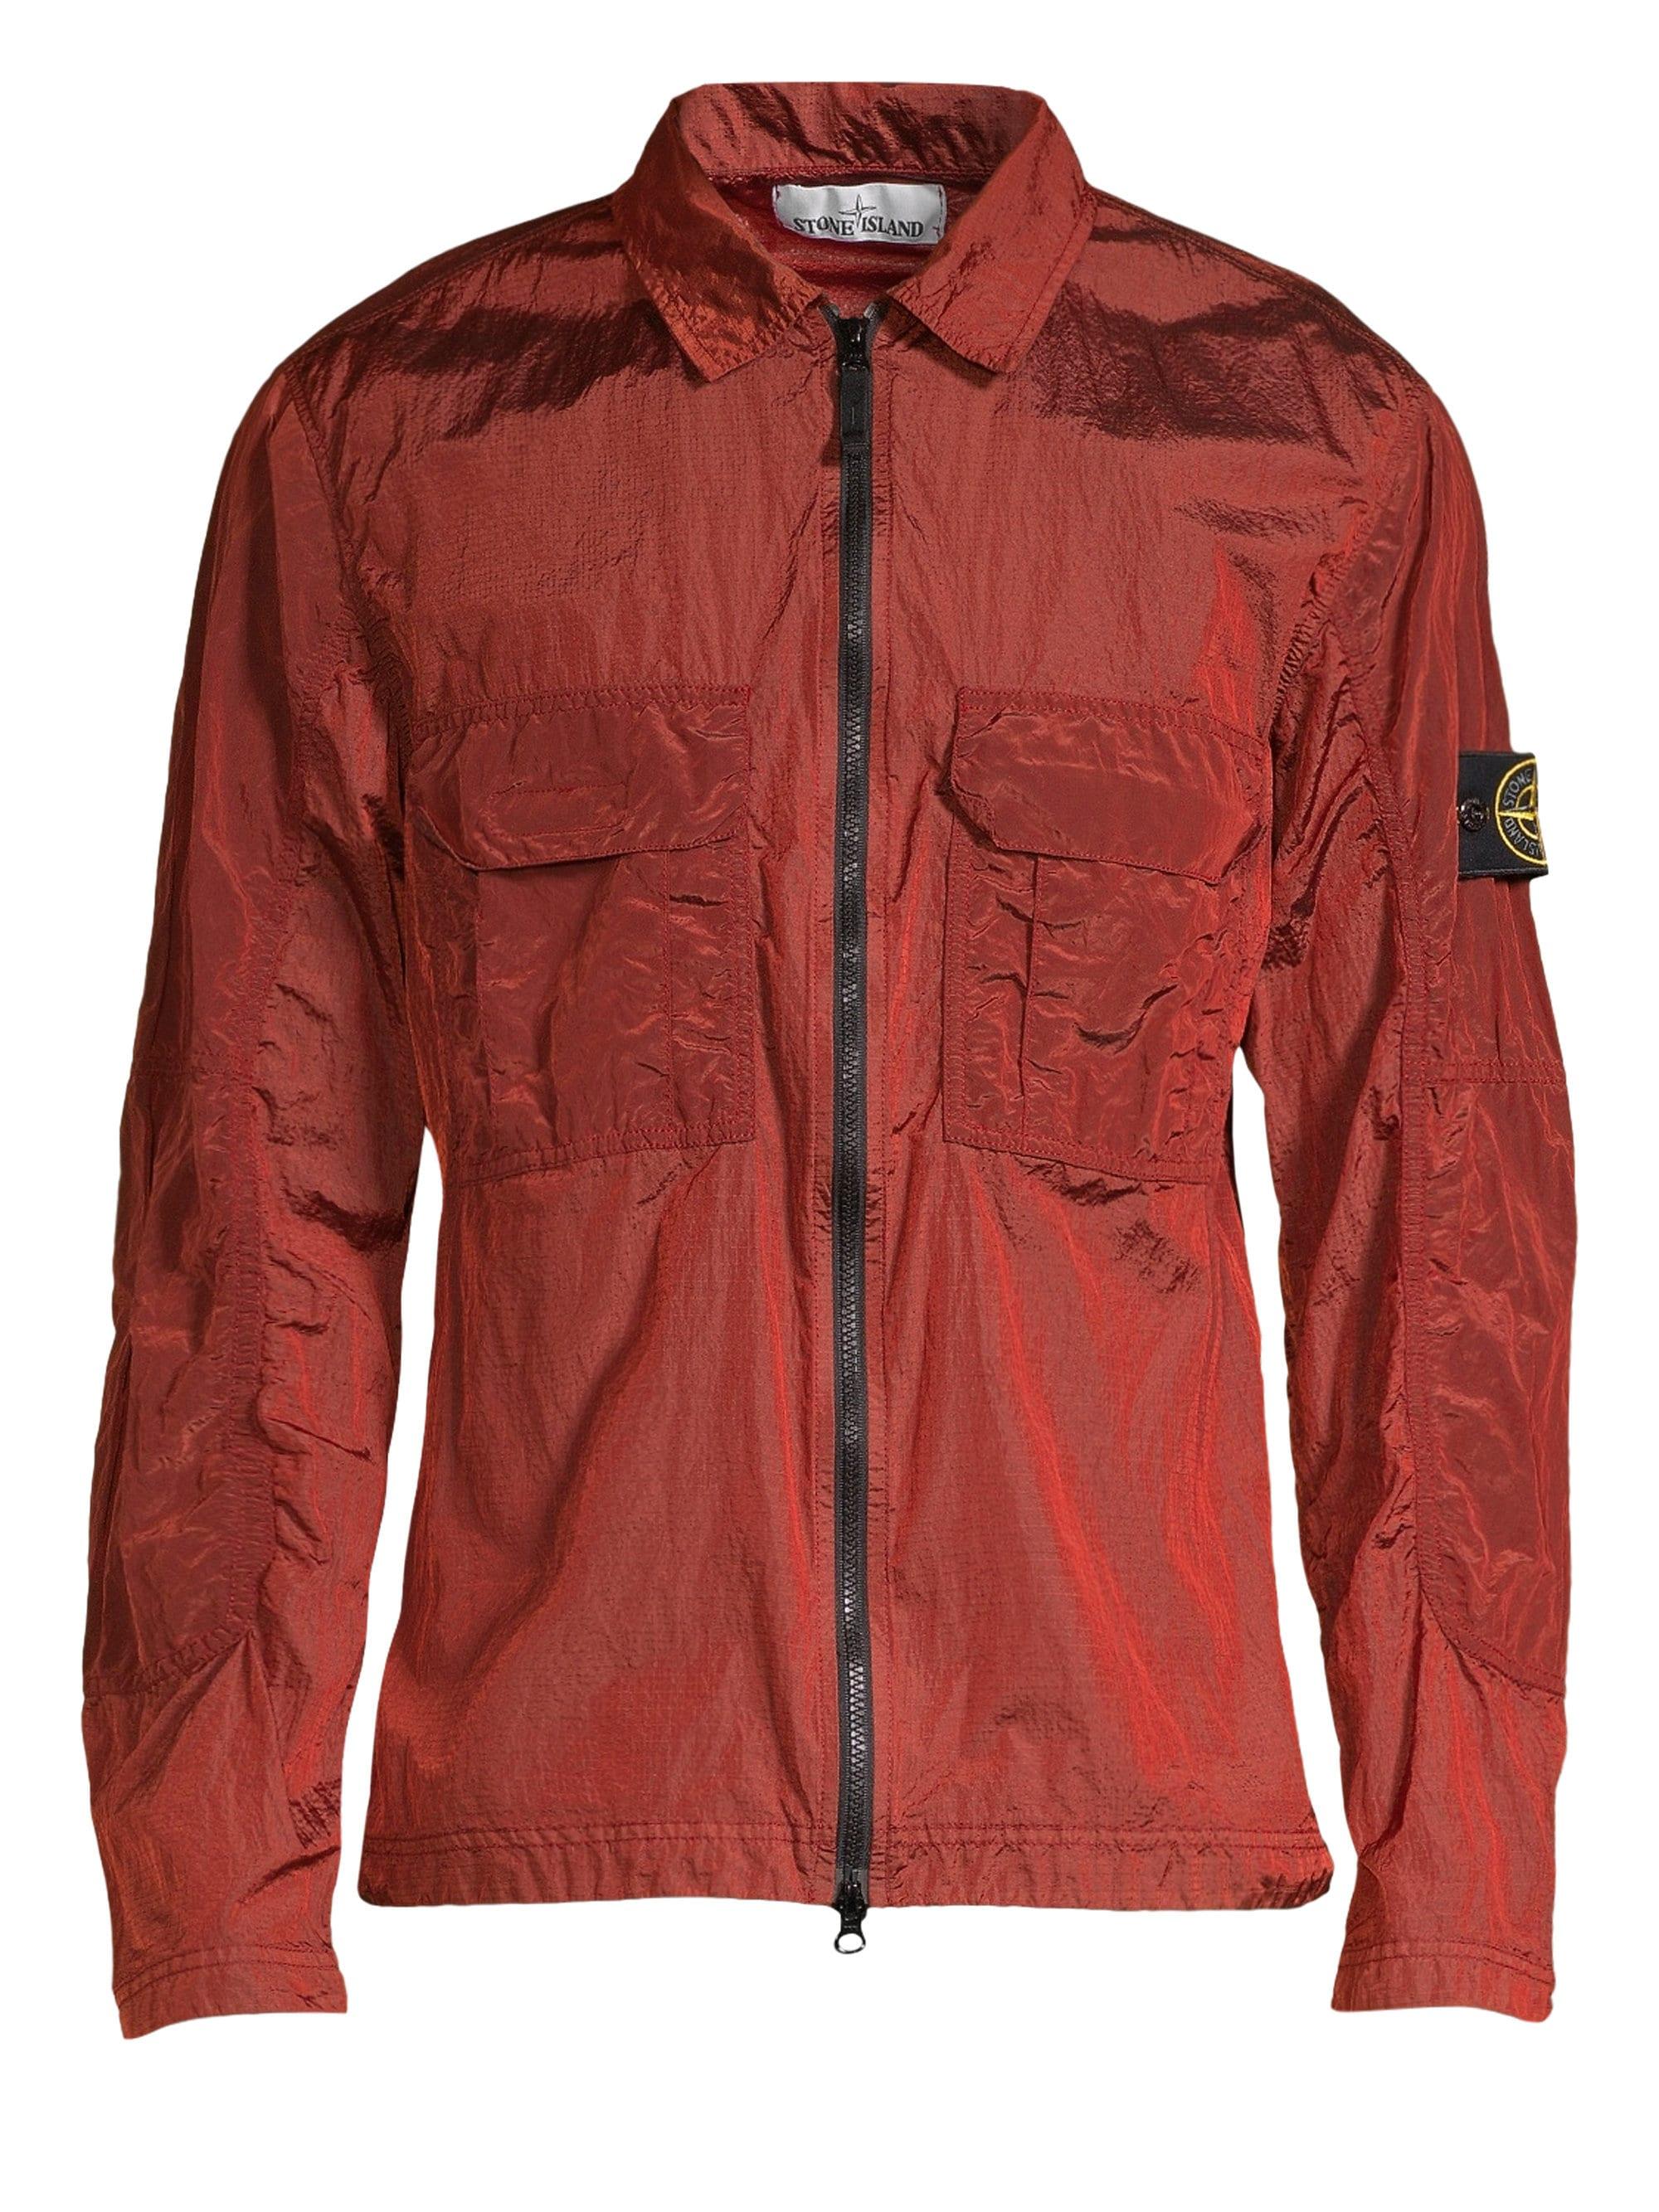 Stone Island Shiny Metallic Overshirt in Brick Red (Red) for Men - Lyst